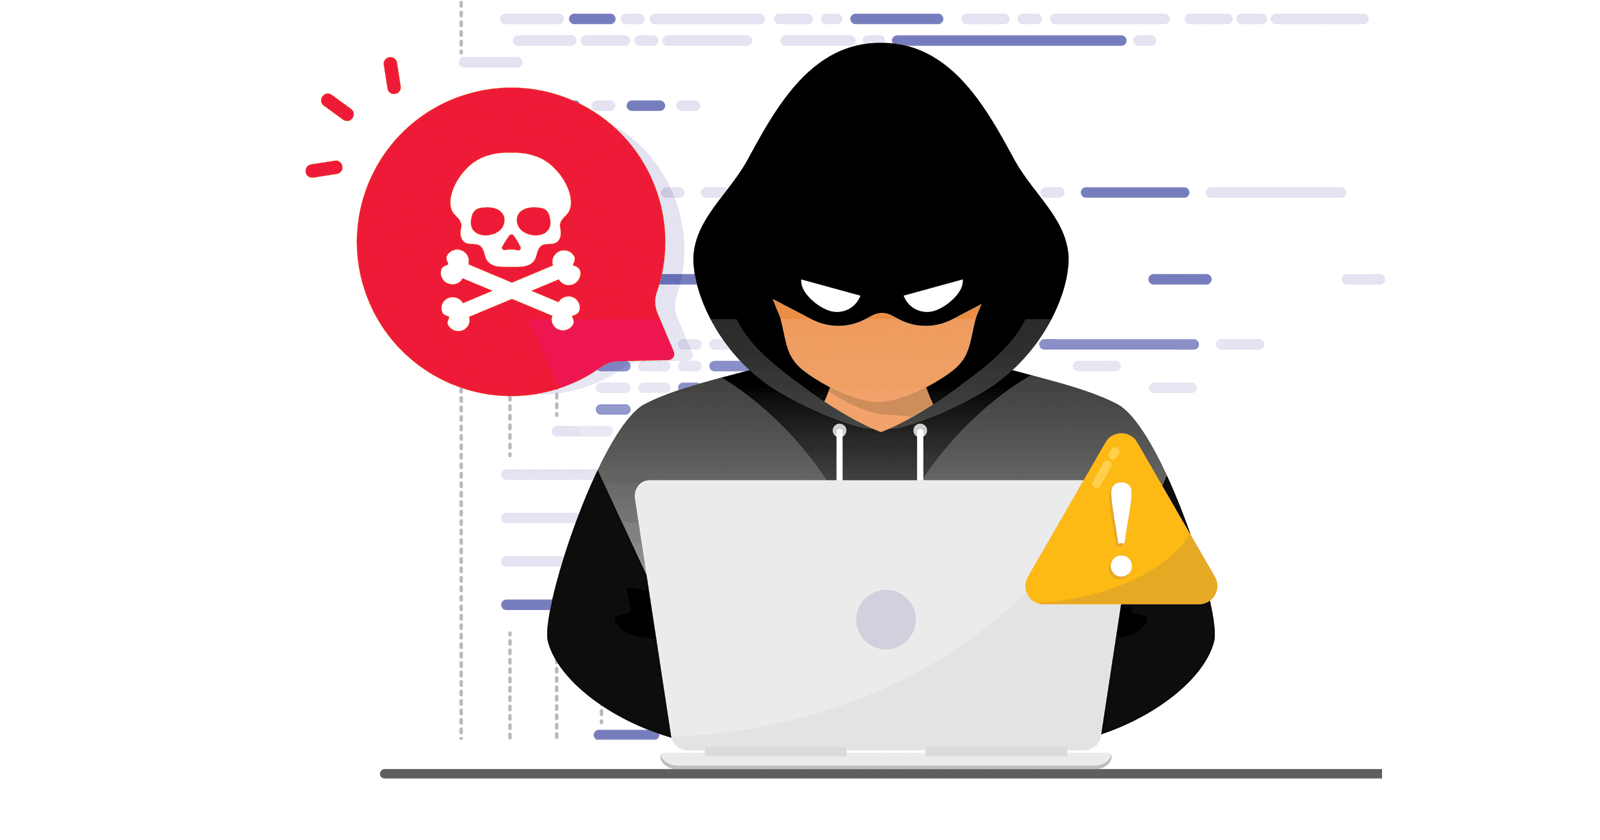 Rackspace Hosted Exchange Outage Due to Security Incident via @sejournal, @martinibuster